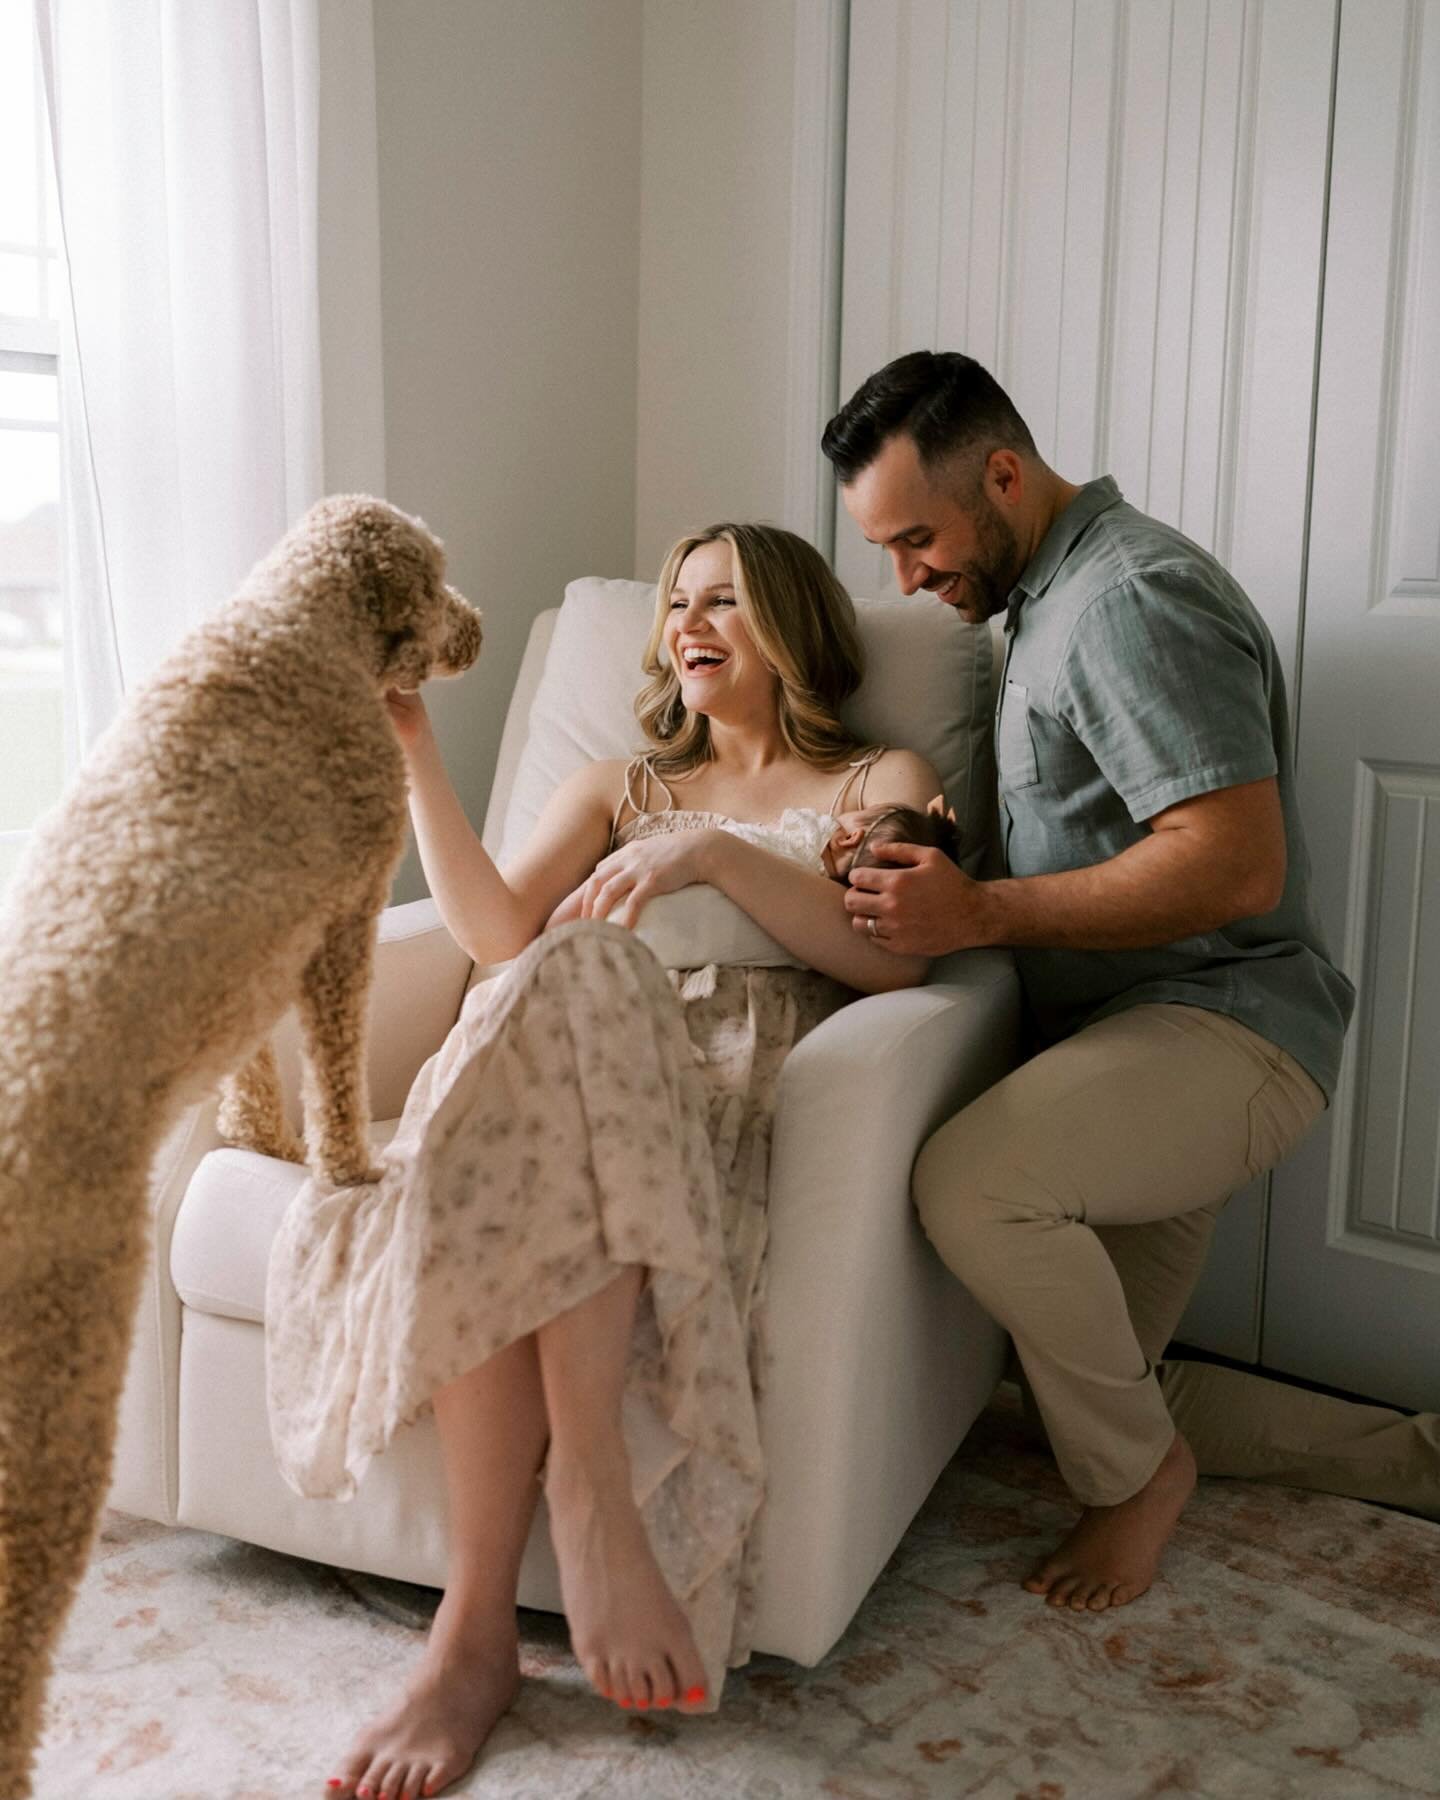 I feel like I&rsquo;ve been holding this gorgeous newborn session hostage! Watching this couple get married and have a baby has been so special and was not shocked they are already amazing parents. Welcome to the world Lainey ❤️